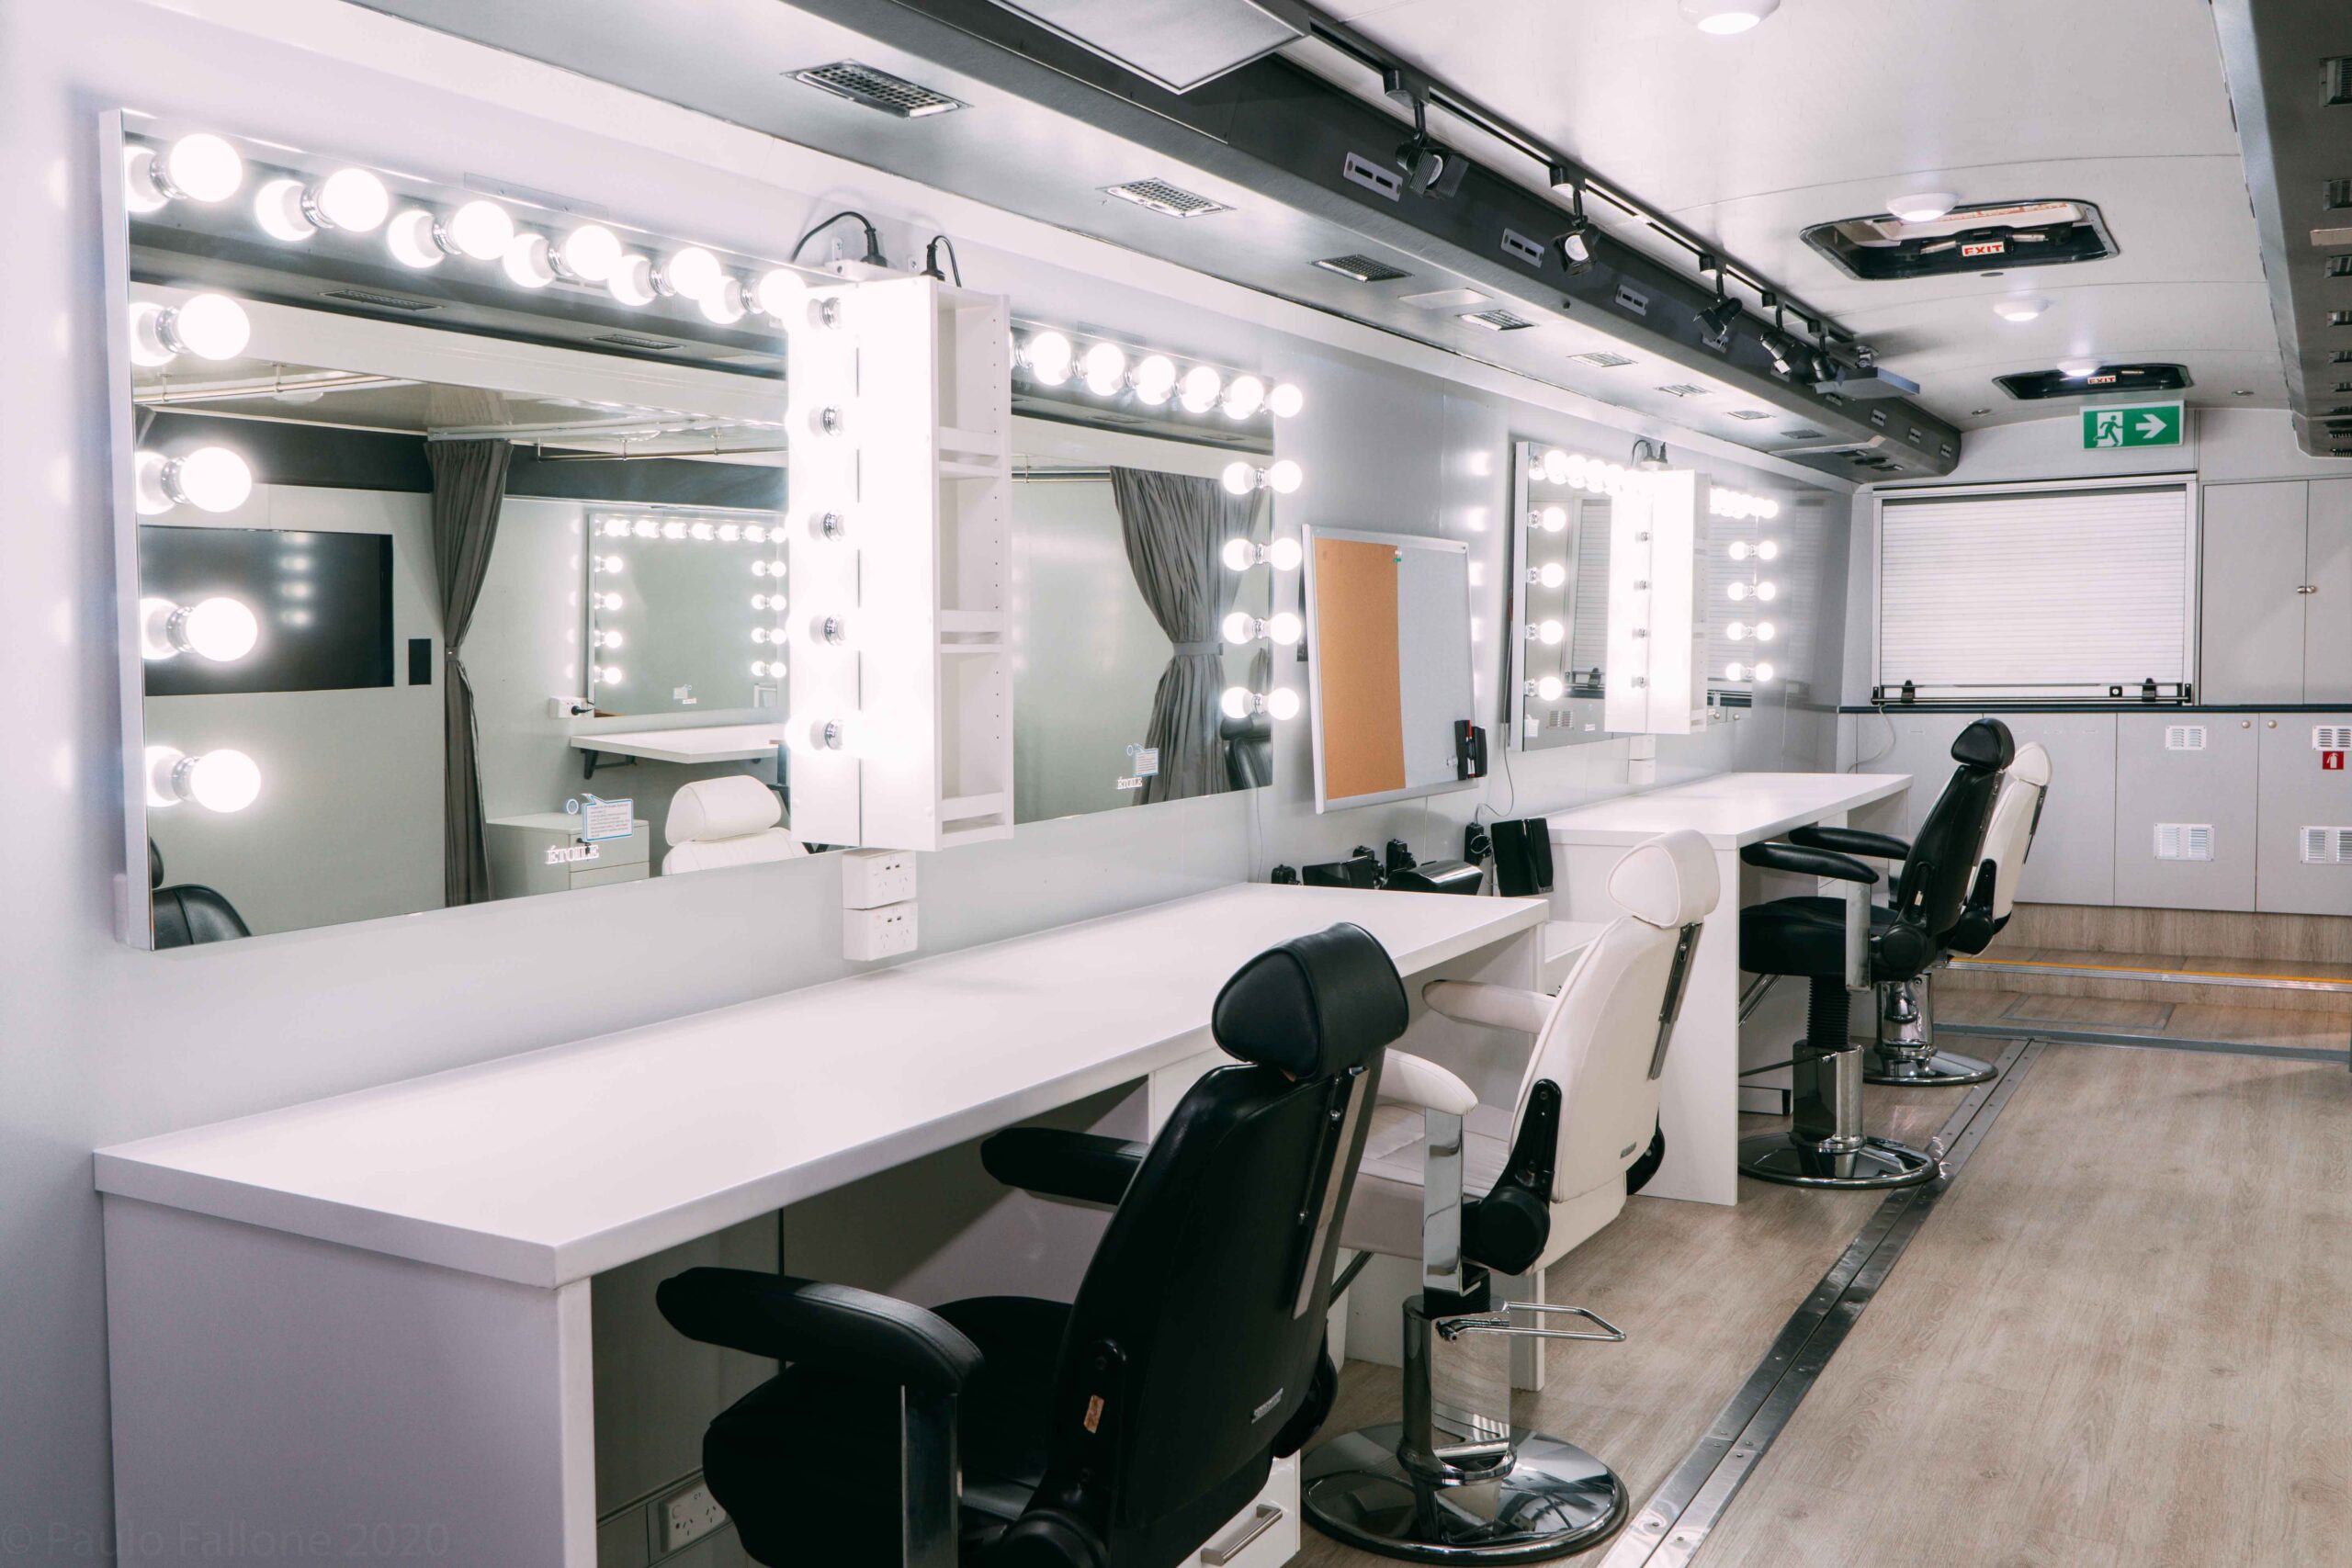 Hair and makeupFour dedicated hair and make-up stations, with plenty of storage. Make-up mirrors are touch control and dimmable, with cool or warm lighting options.